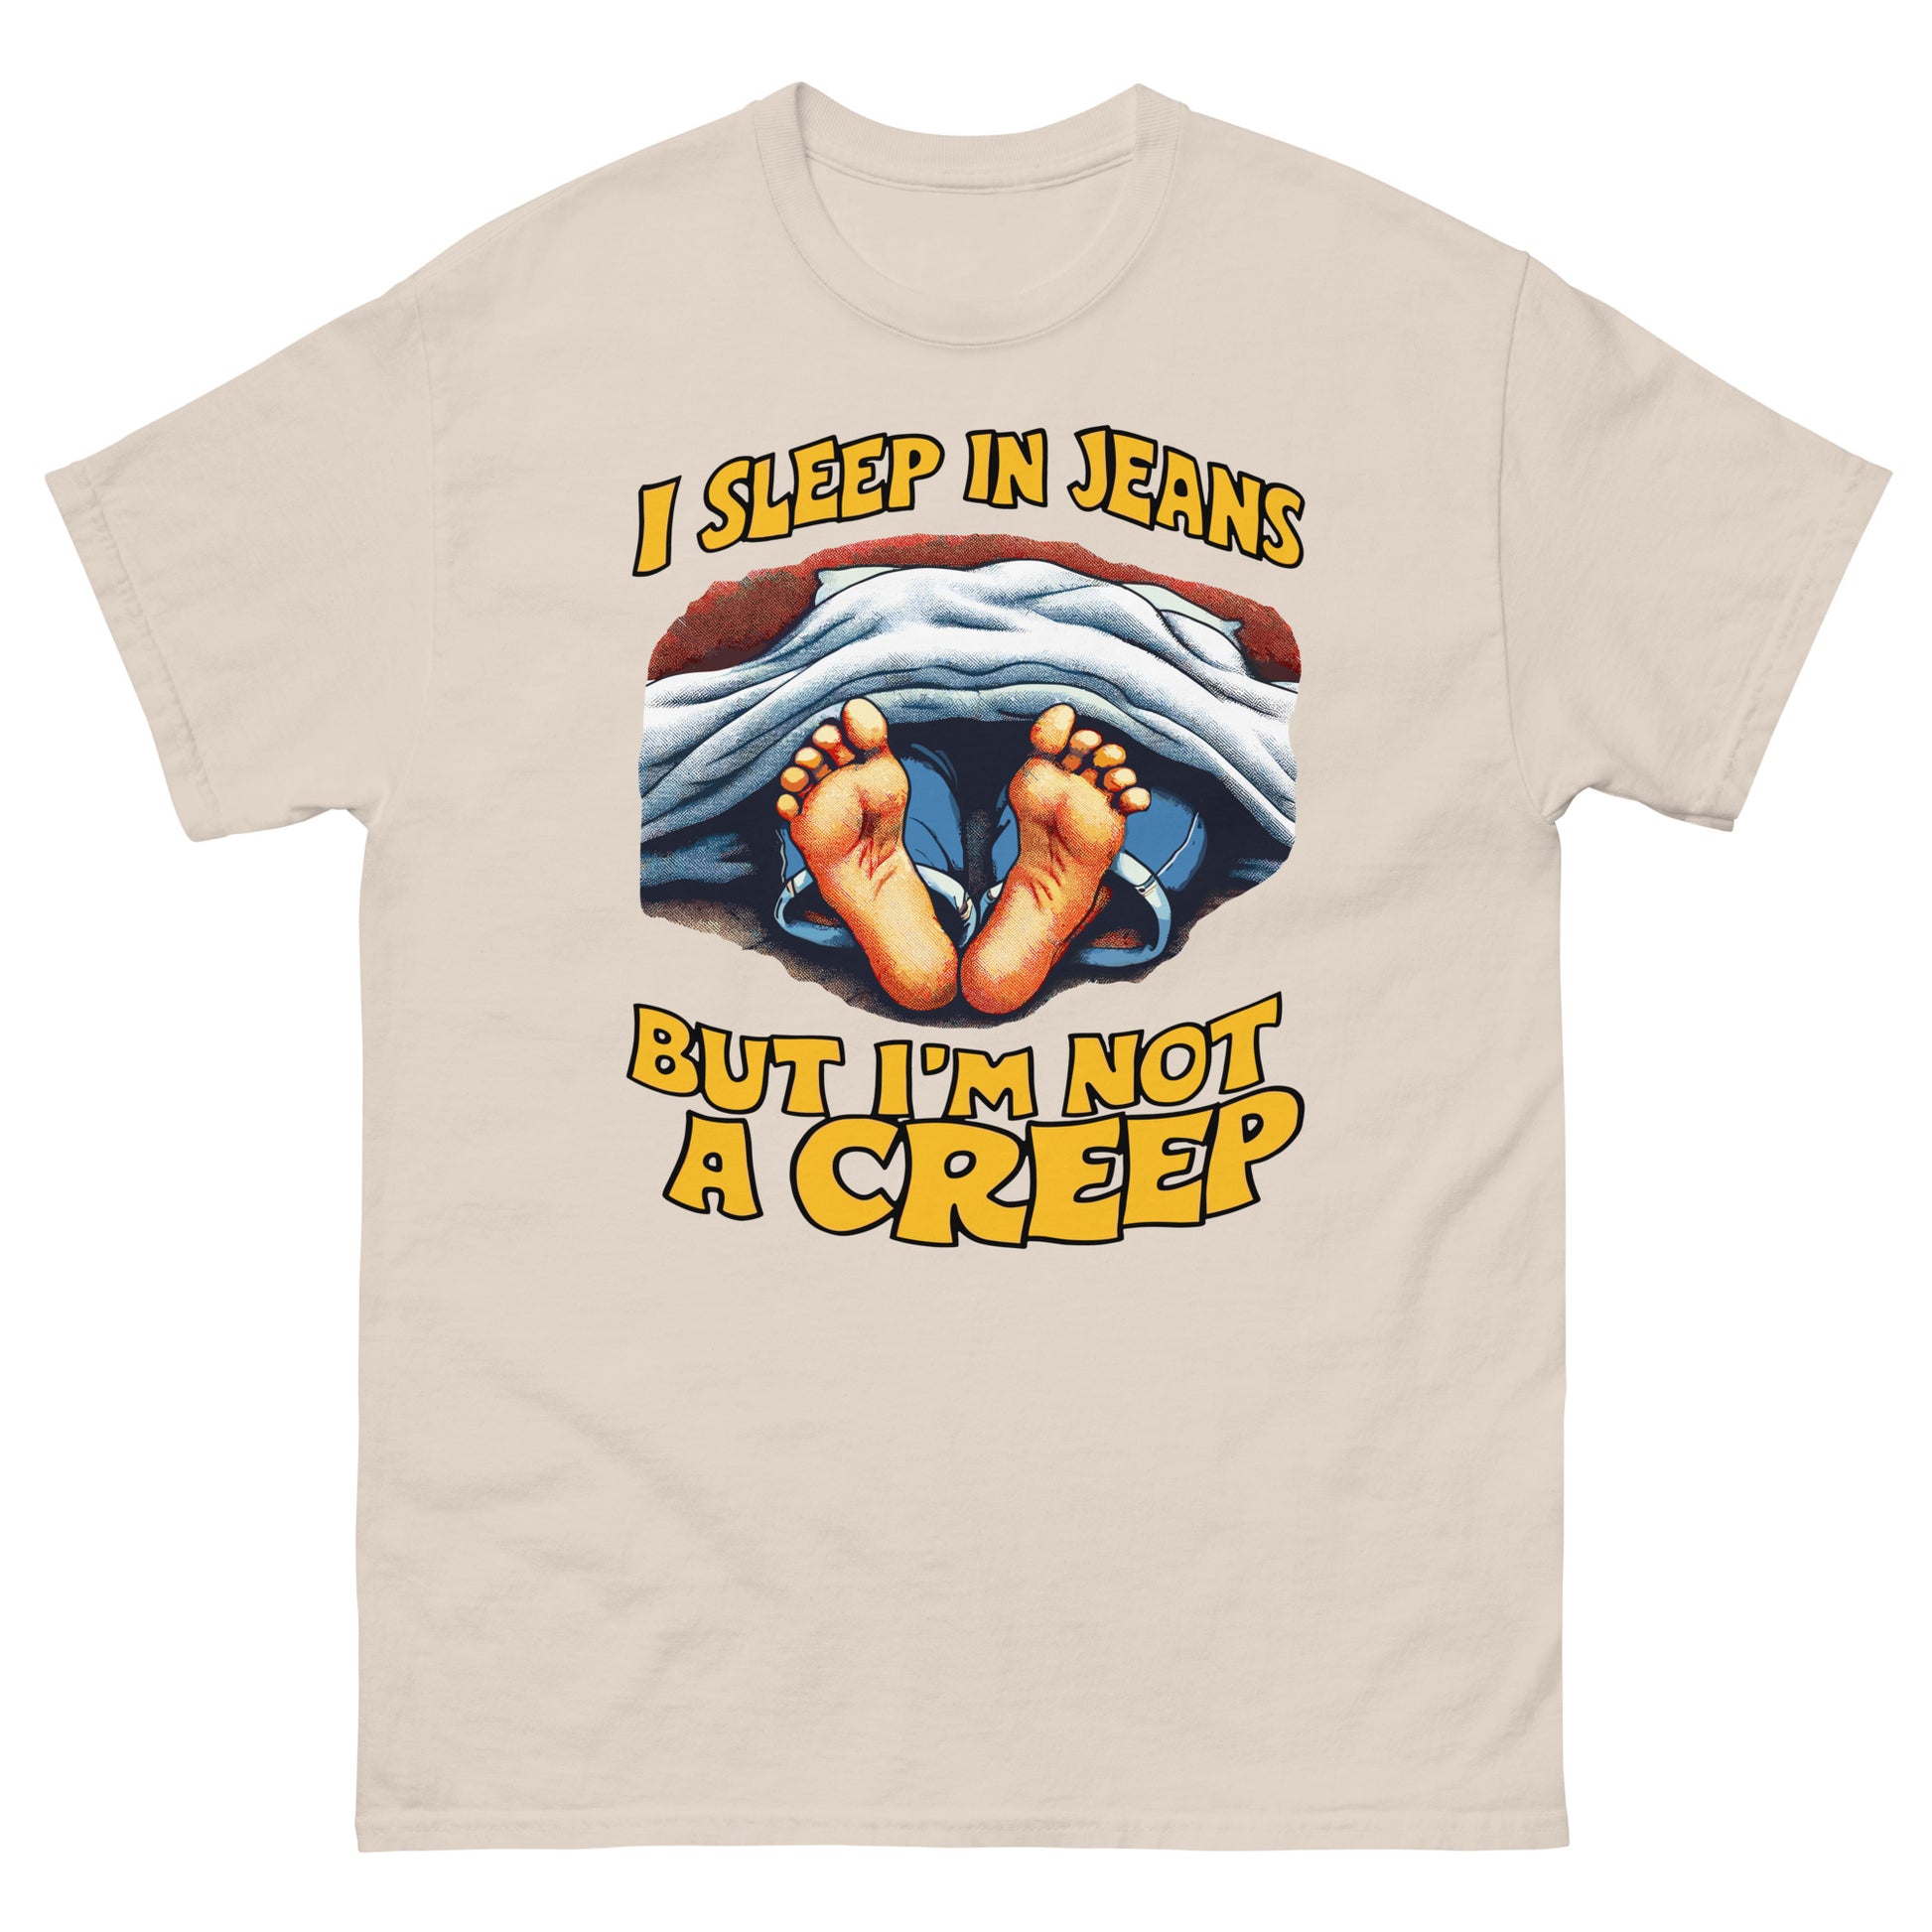 I sleep in jeans but im not a creep design printed on t-shirt by Whistler Shirts